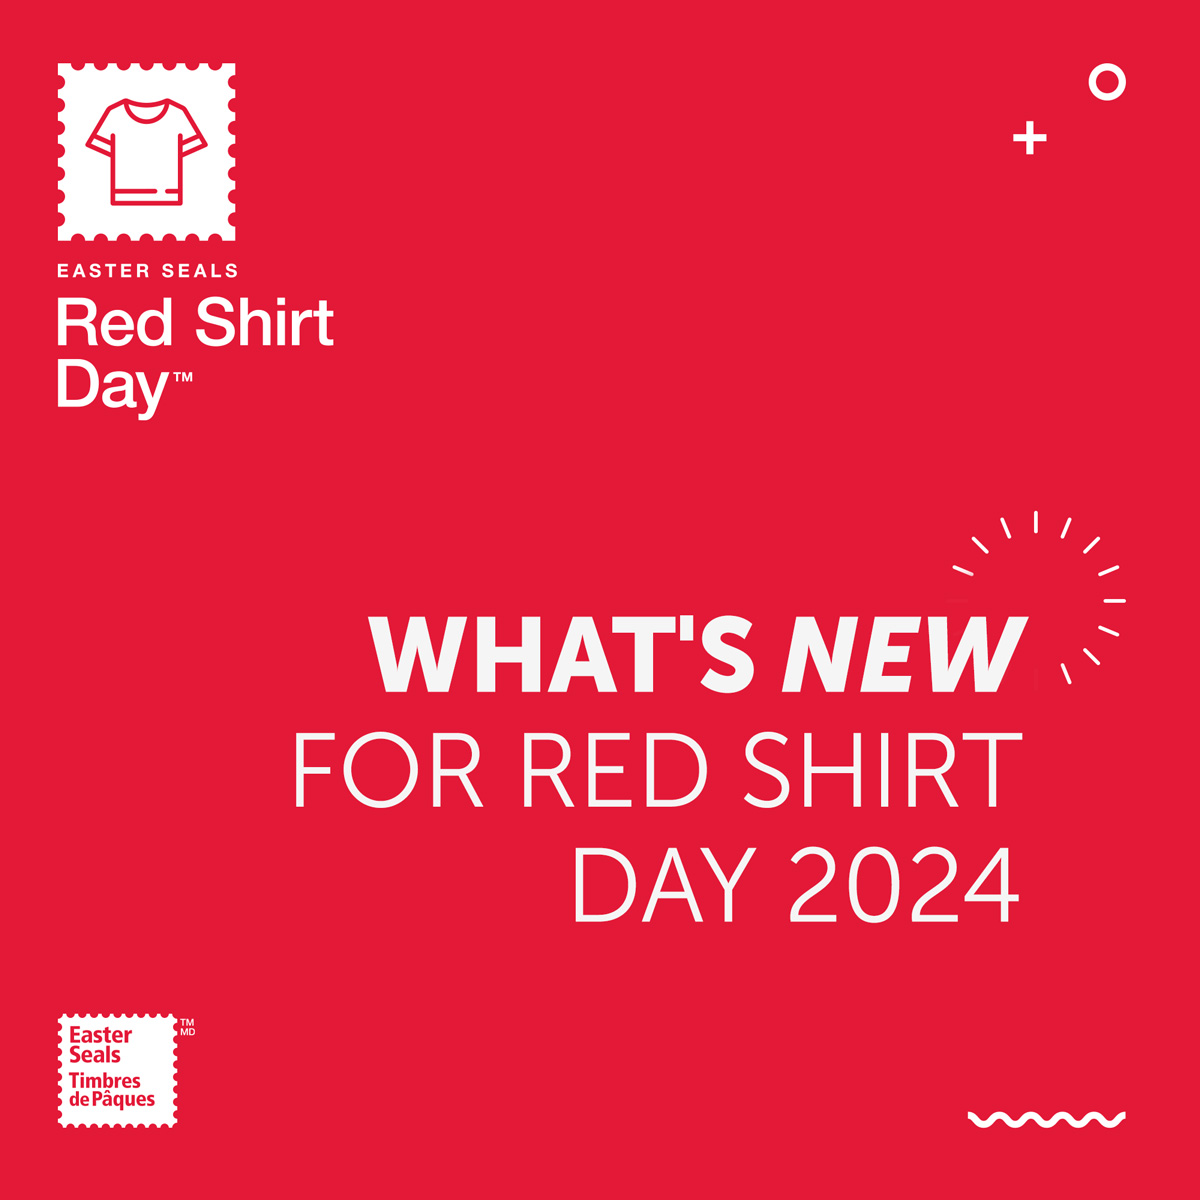 Easter Seals’ Red Shirt Day™ 2024 is on Wednesday, May 29th – now just 2 weeks away, and we invite you to visit redshirtday.ca to see what's new this year!

#RedShirtDay #RedForAccessAbility